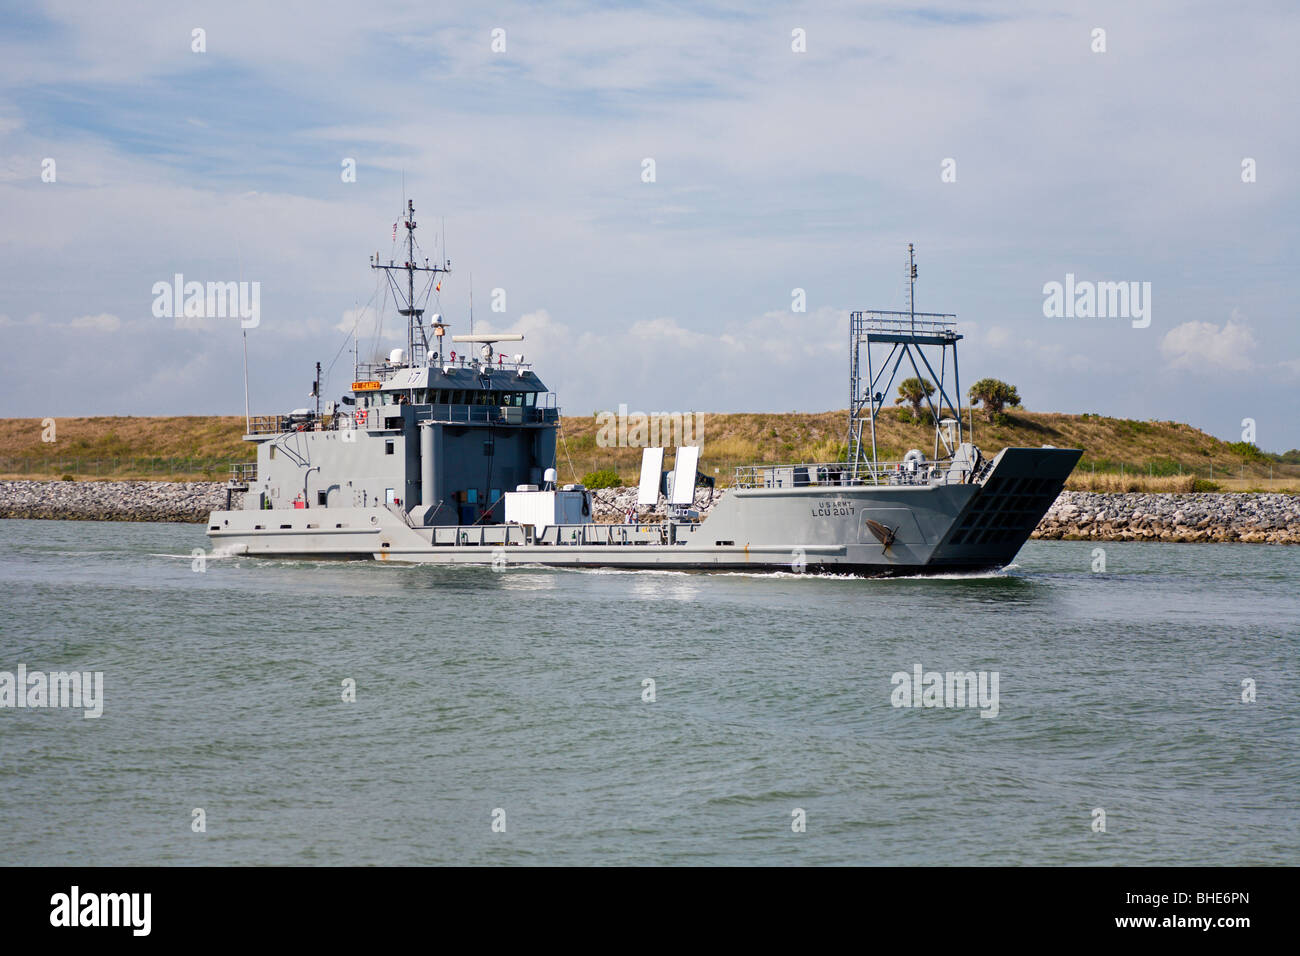 El Caney, a US Army Runnymede class large landing craft in the channel at Port Canaveral, Florida Stock Photo